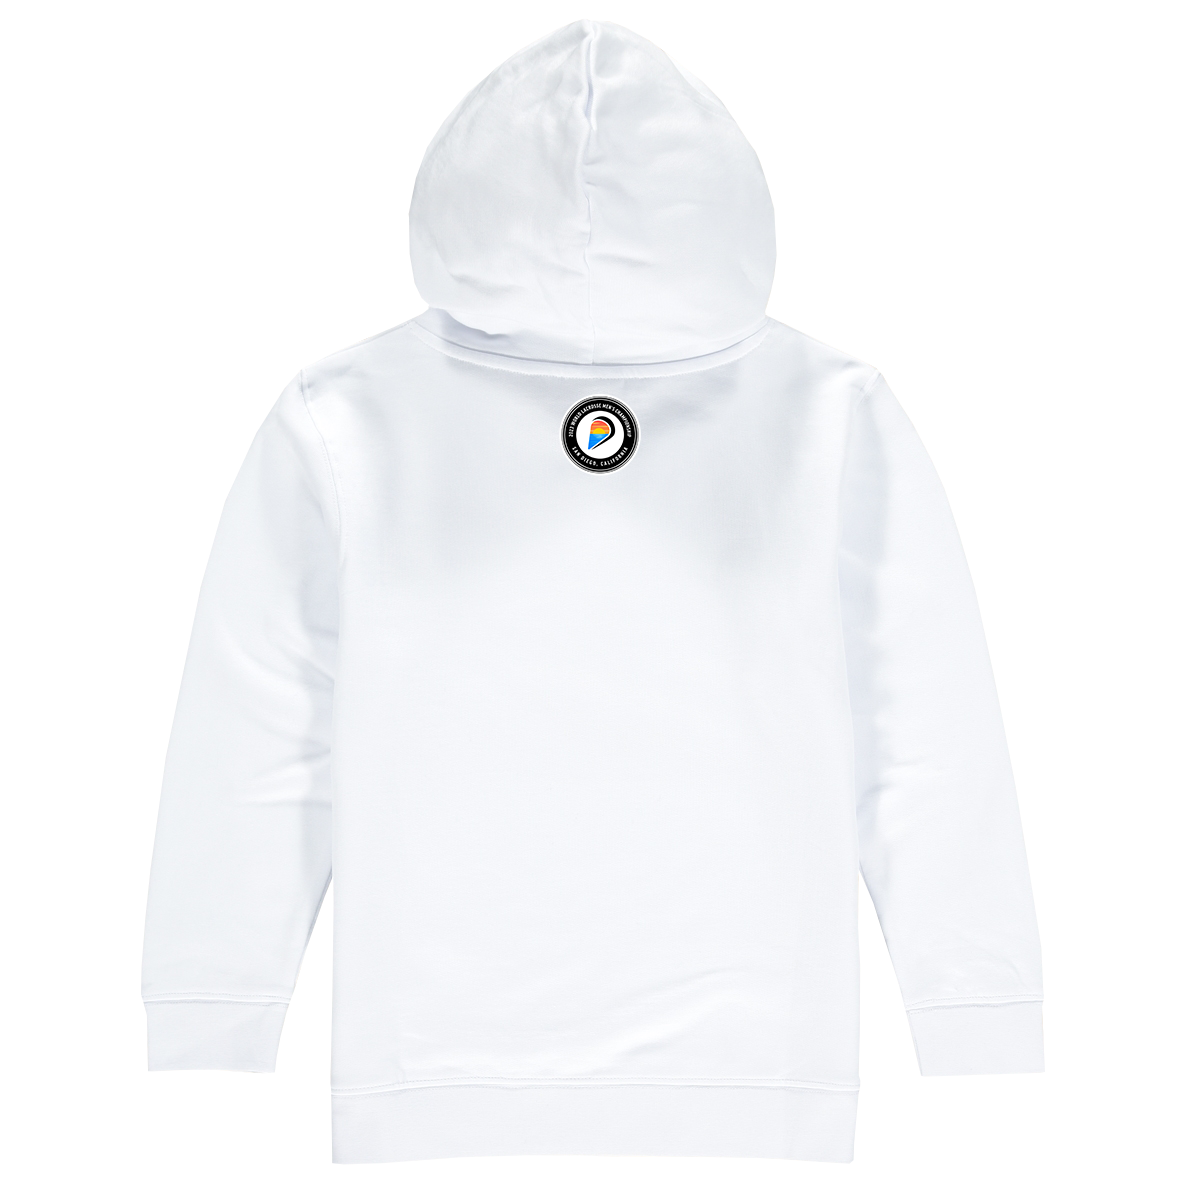 Netherlands Classic Youth Hoodie White